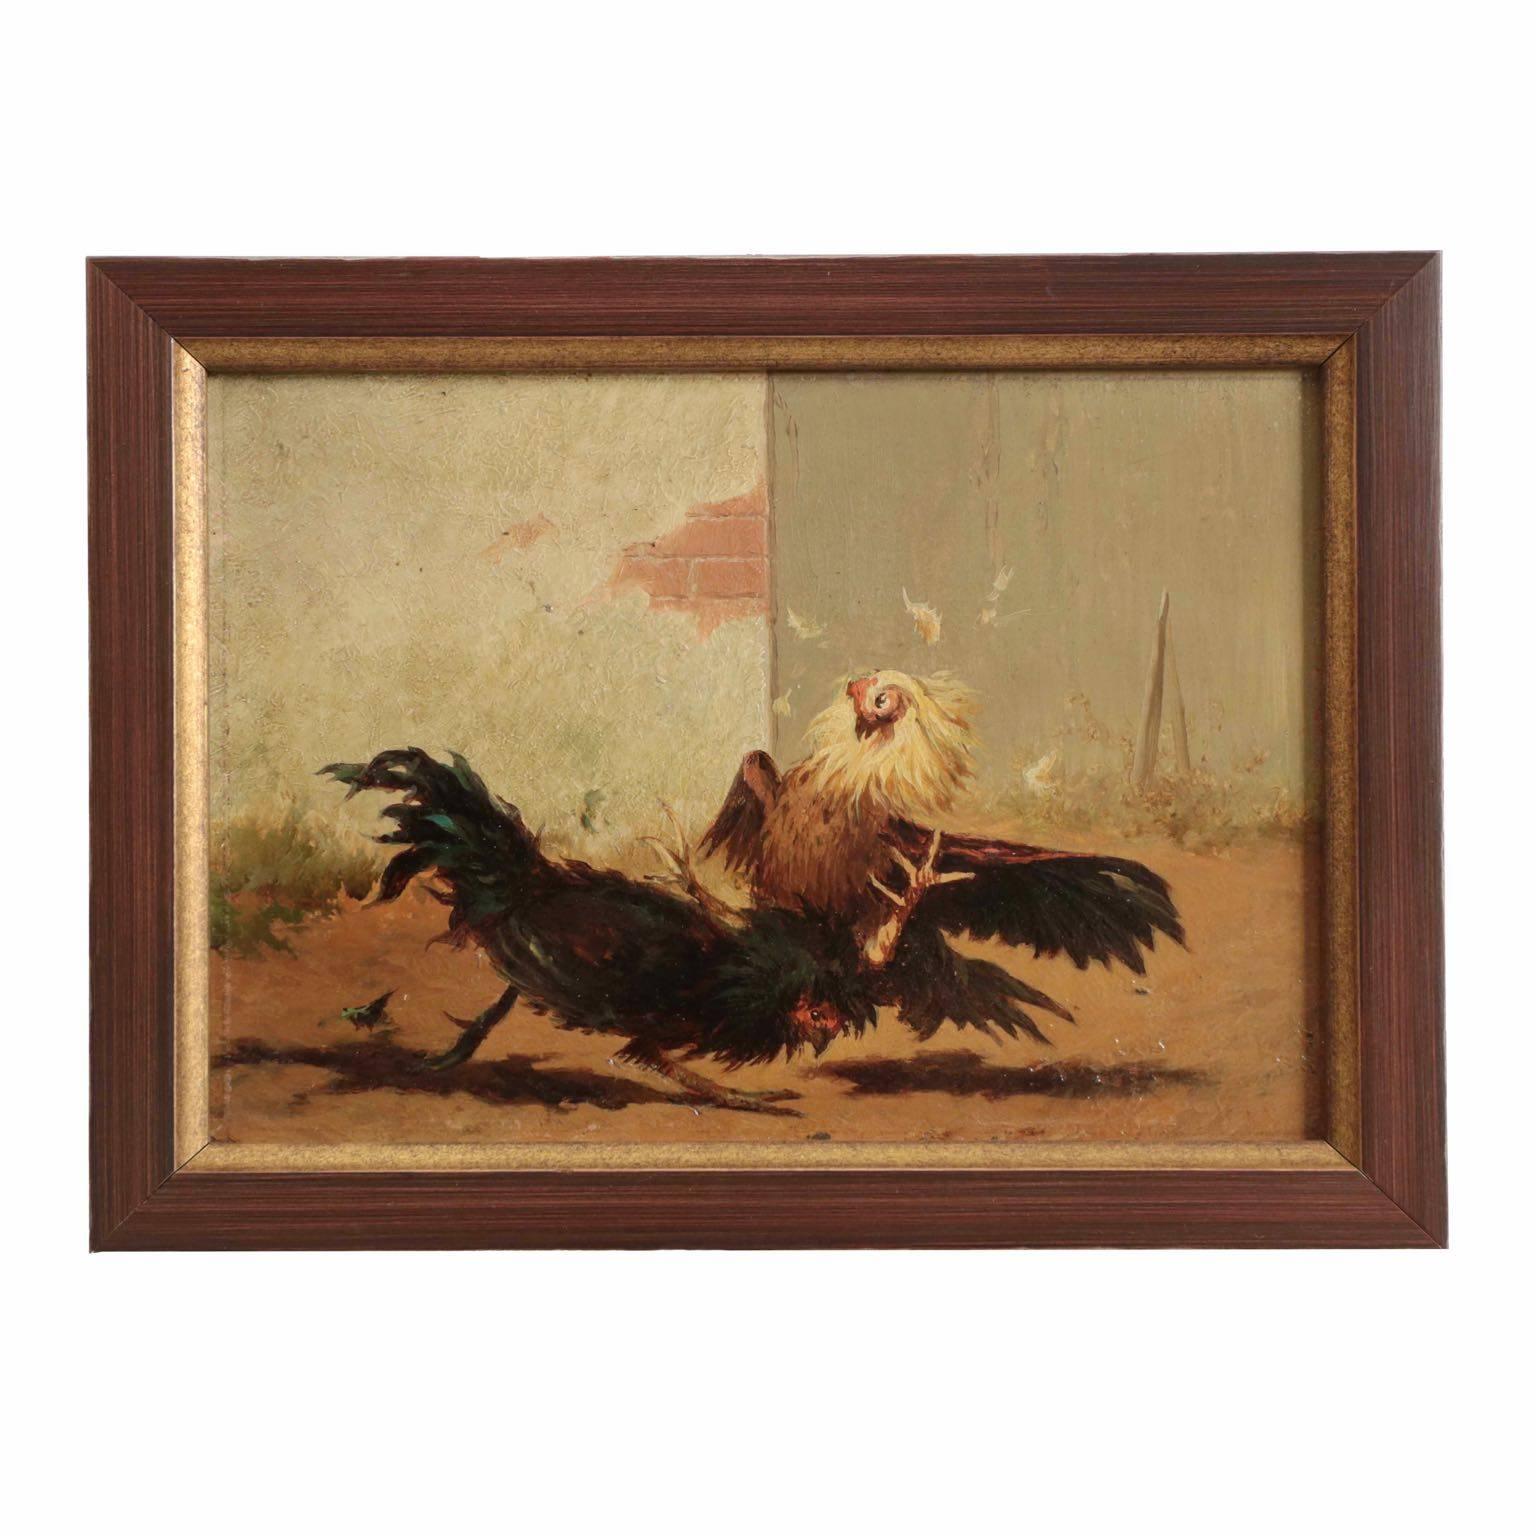 A fine set of four Barbizon paintings by the American artist William Baptiste Baird and executed in Paris in oil on panel, each successively depicts a pair of cock roosters in confrontation: they start walking, then the dark rooster begins to chase